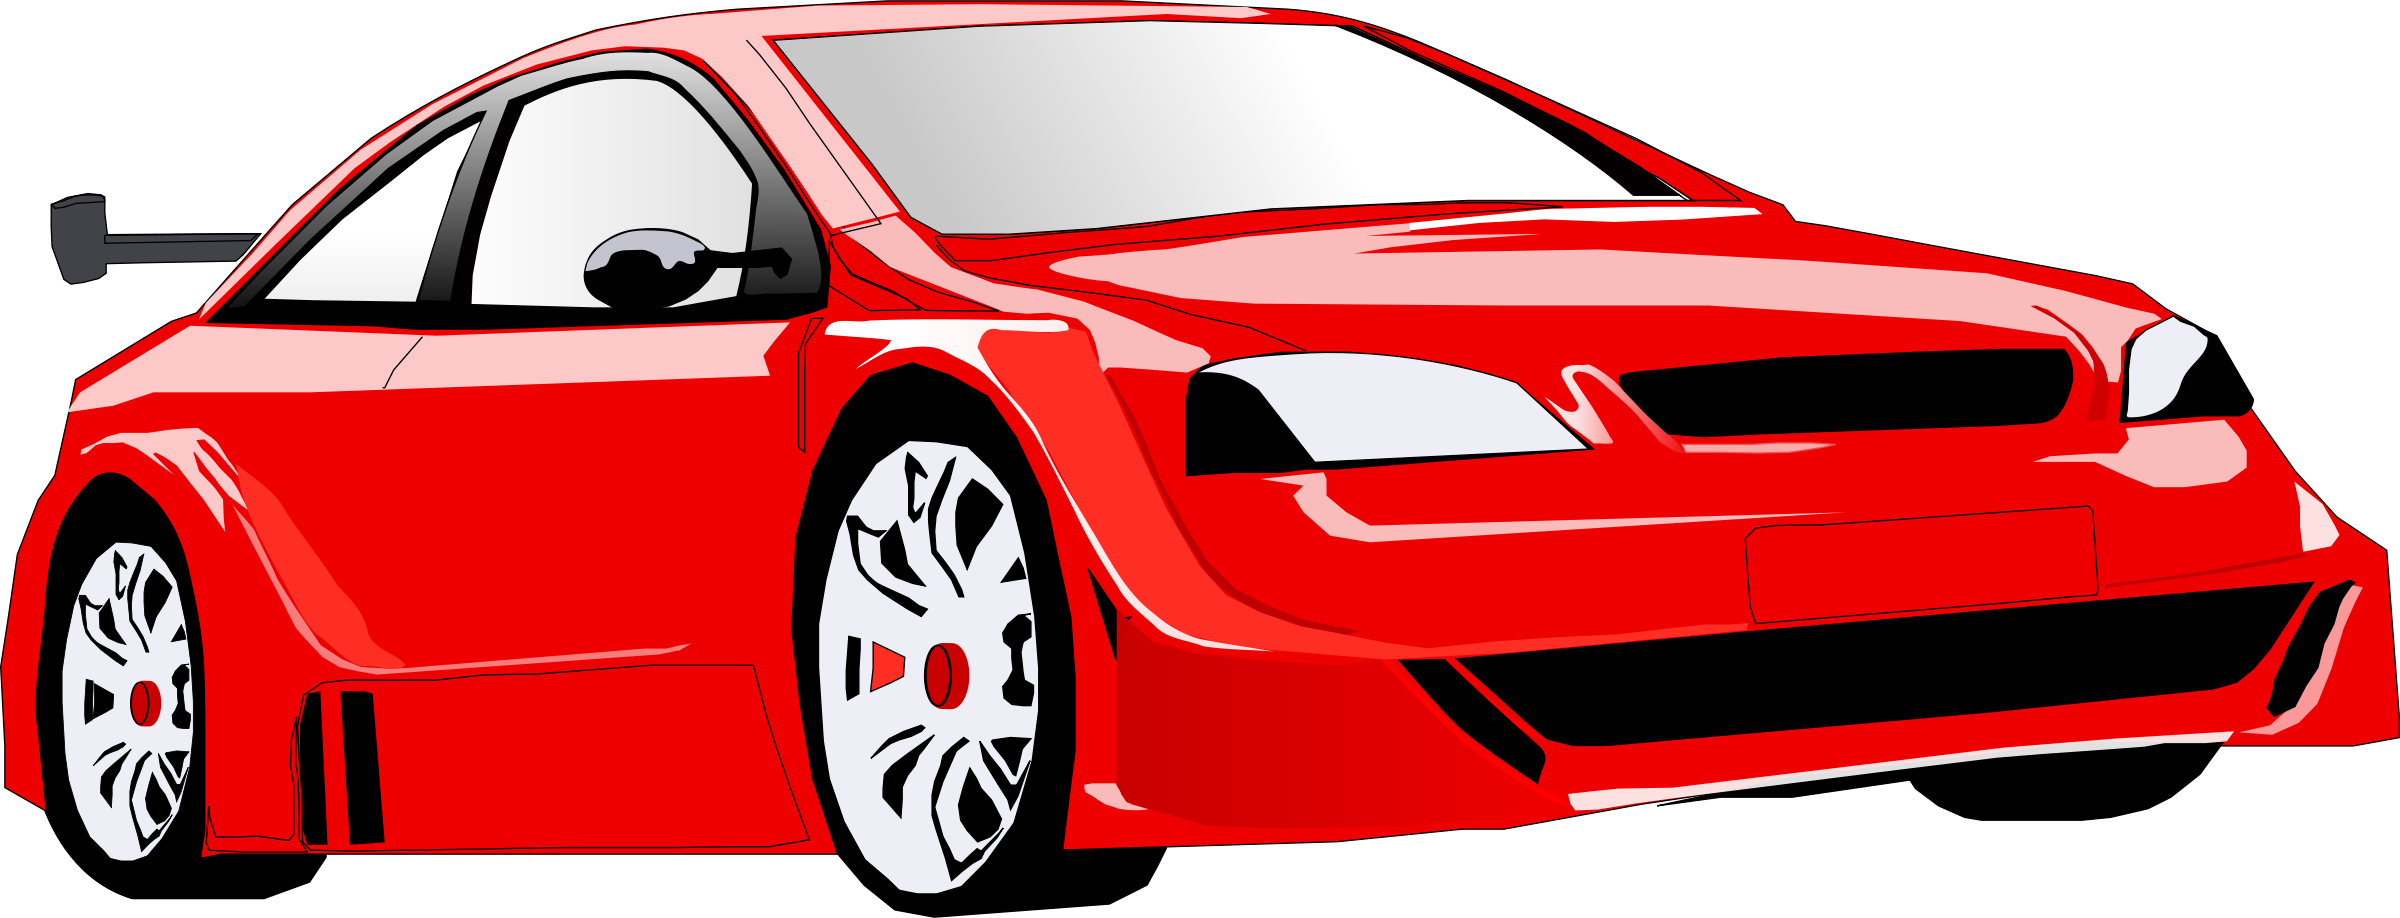 Cars car clipart free large i - Clip Art Of Cars